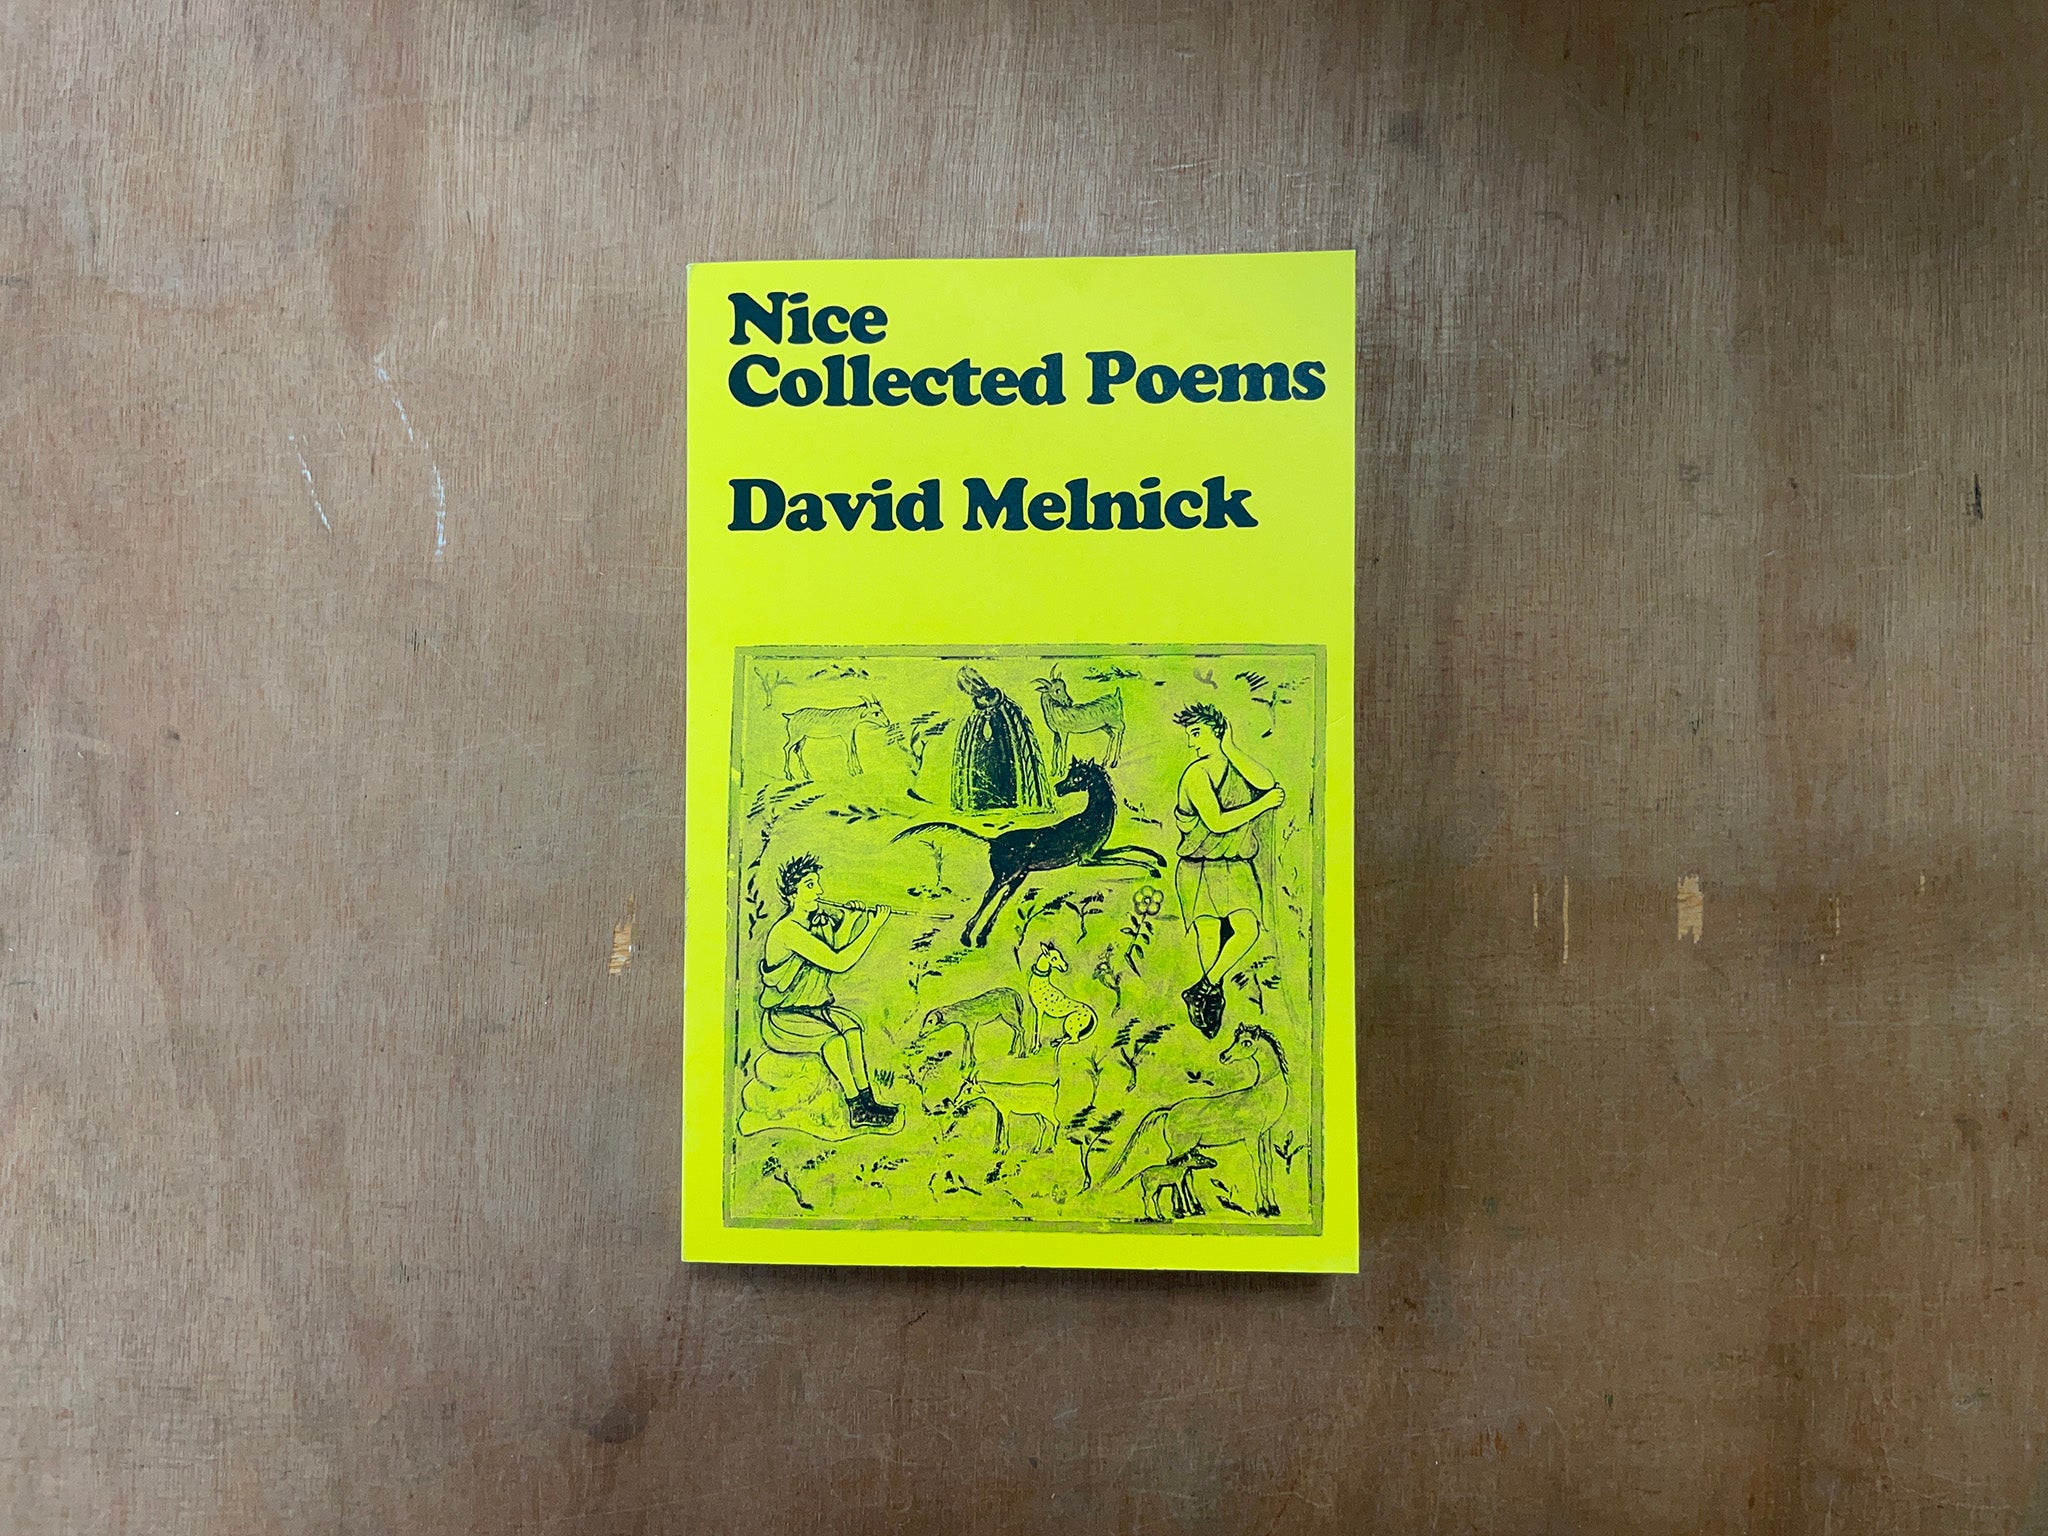 NICE: COLLECTED POEMS by David Melnick